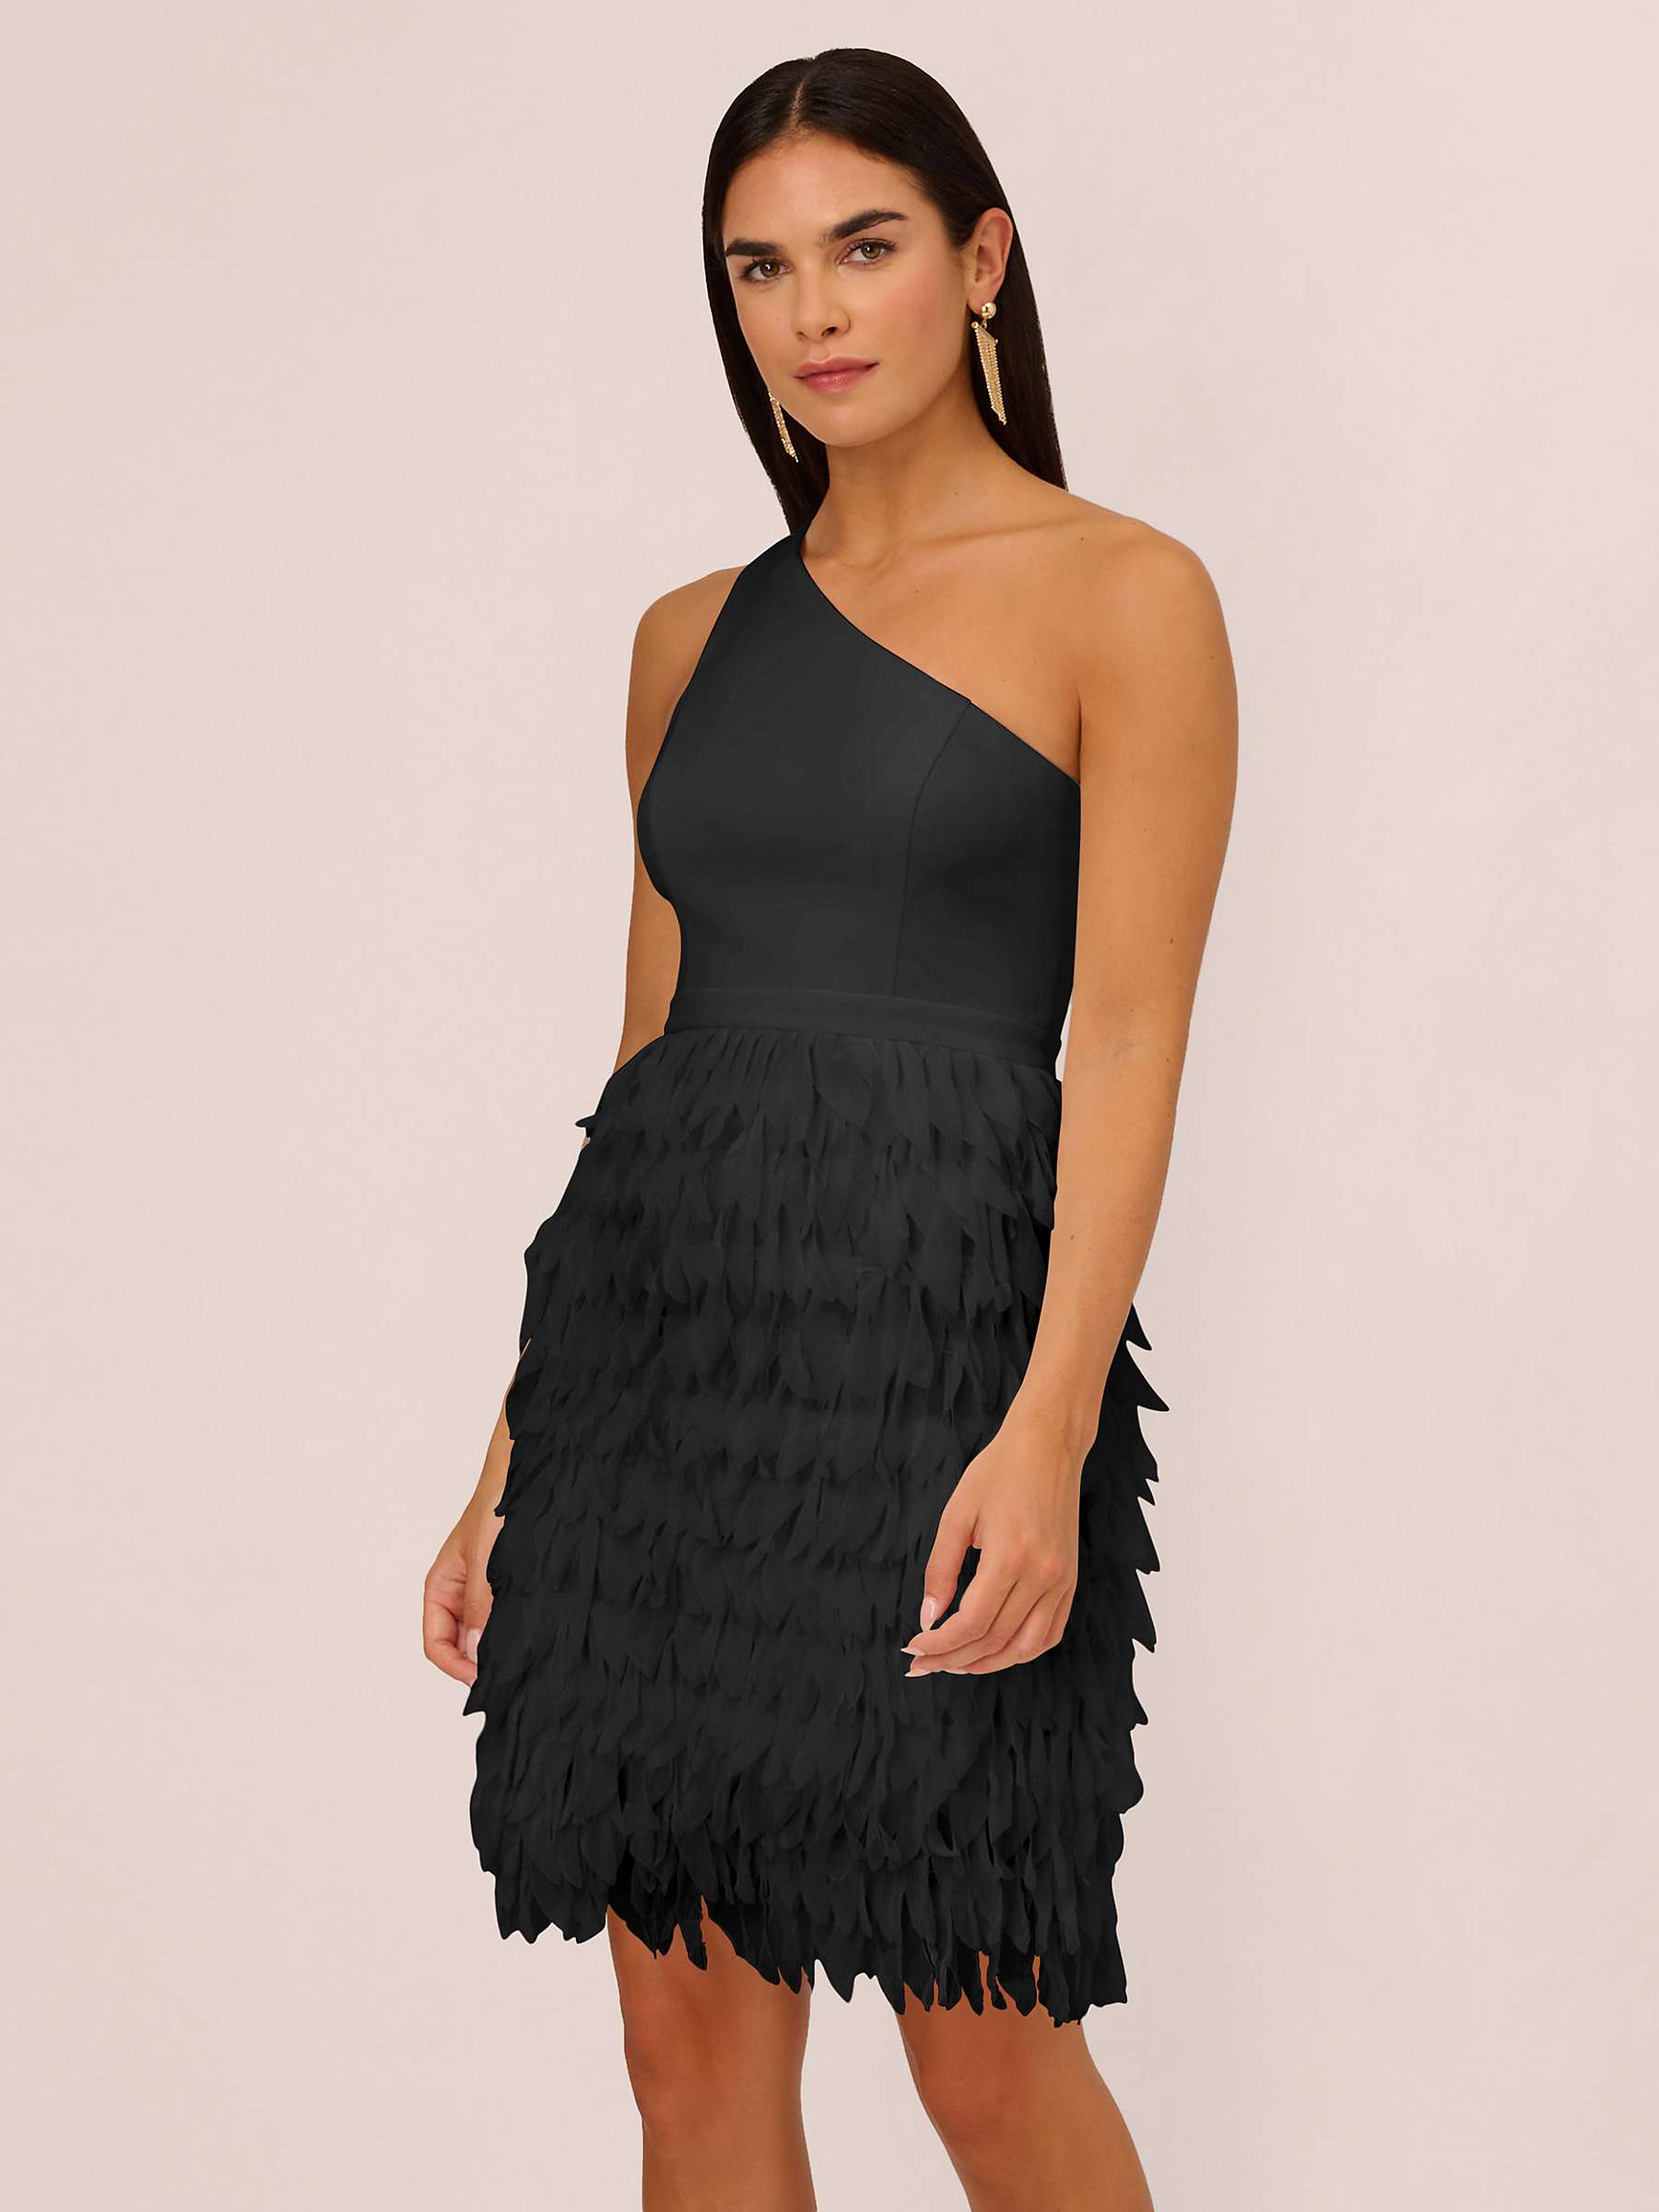 Buy Aidan by Adrianna Papell Chiffon Feather Cocktail Dress, Black Online at johnlewis.com